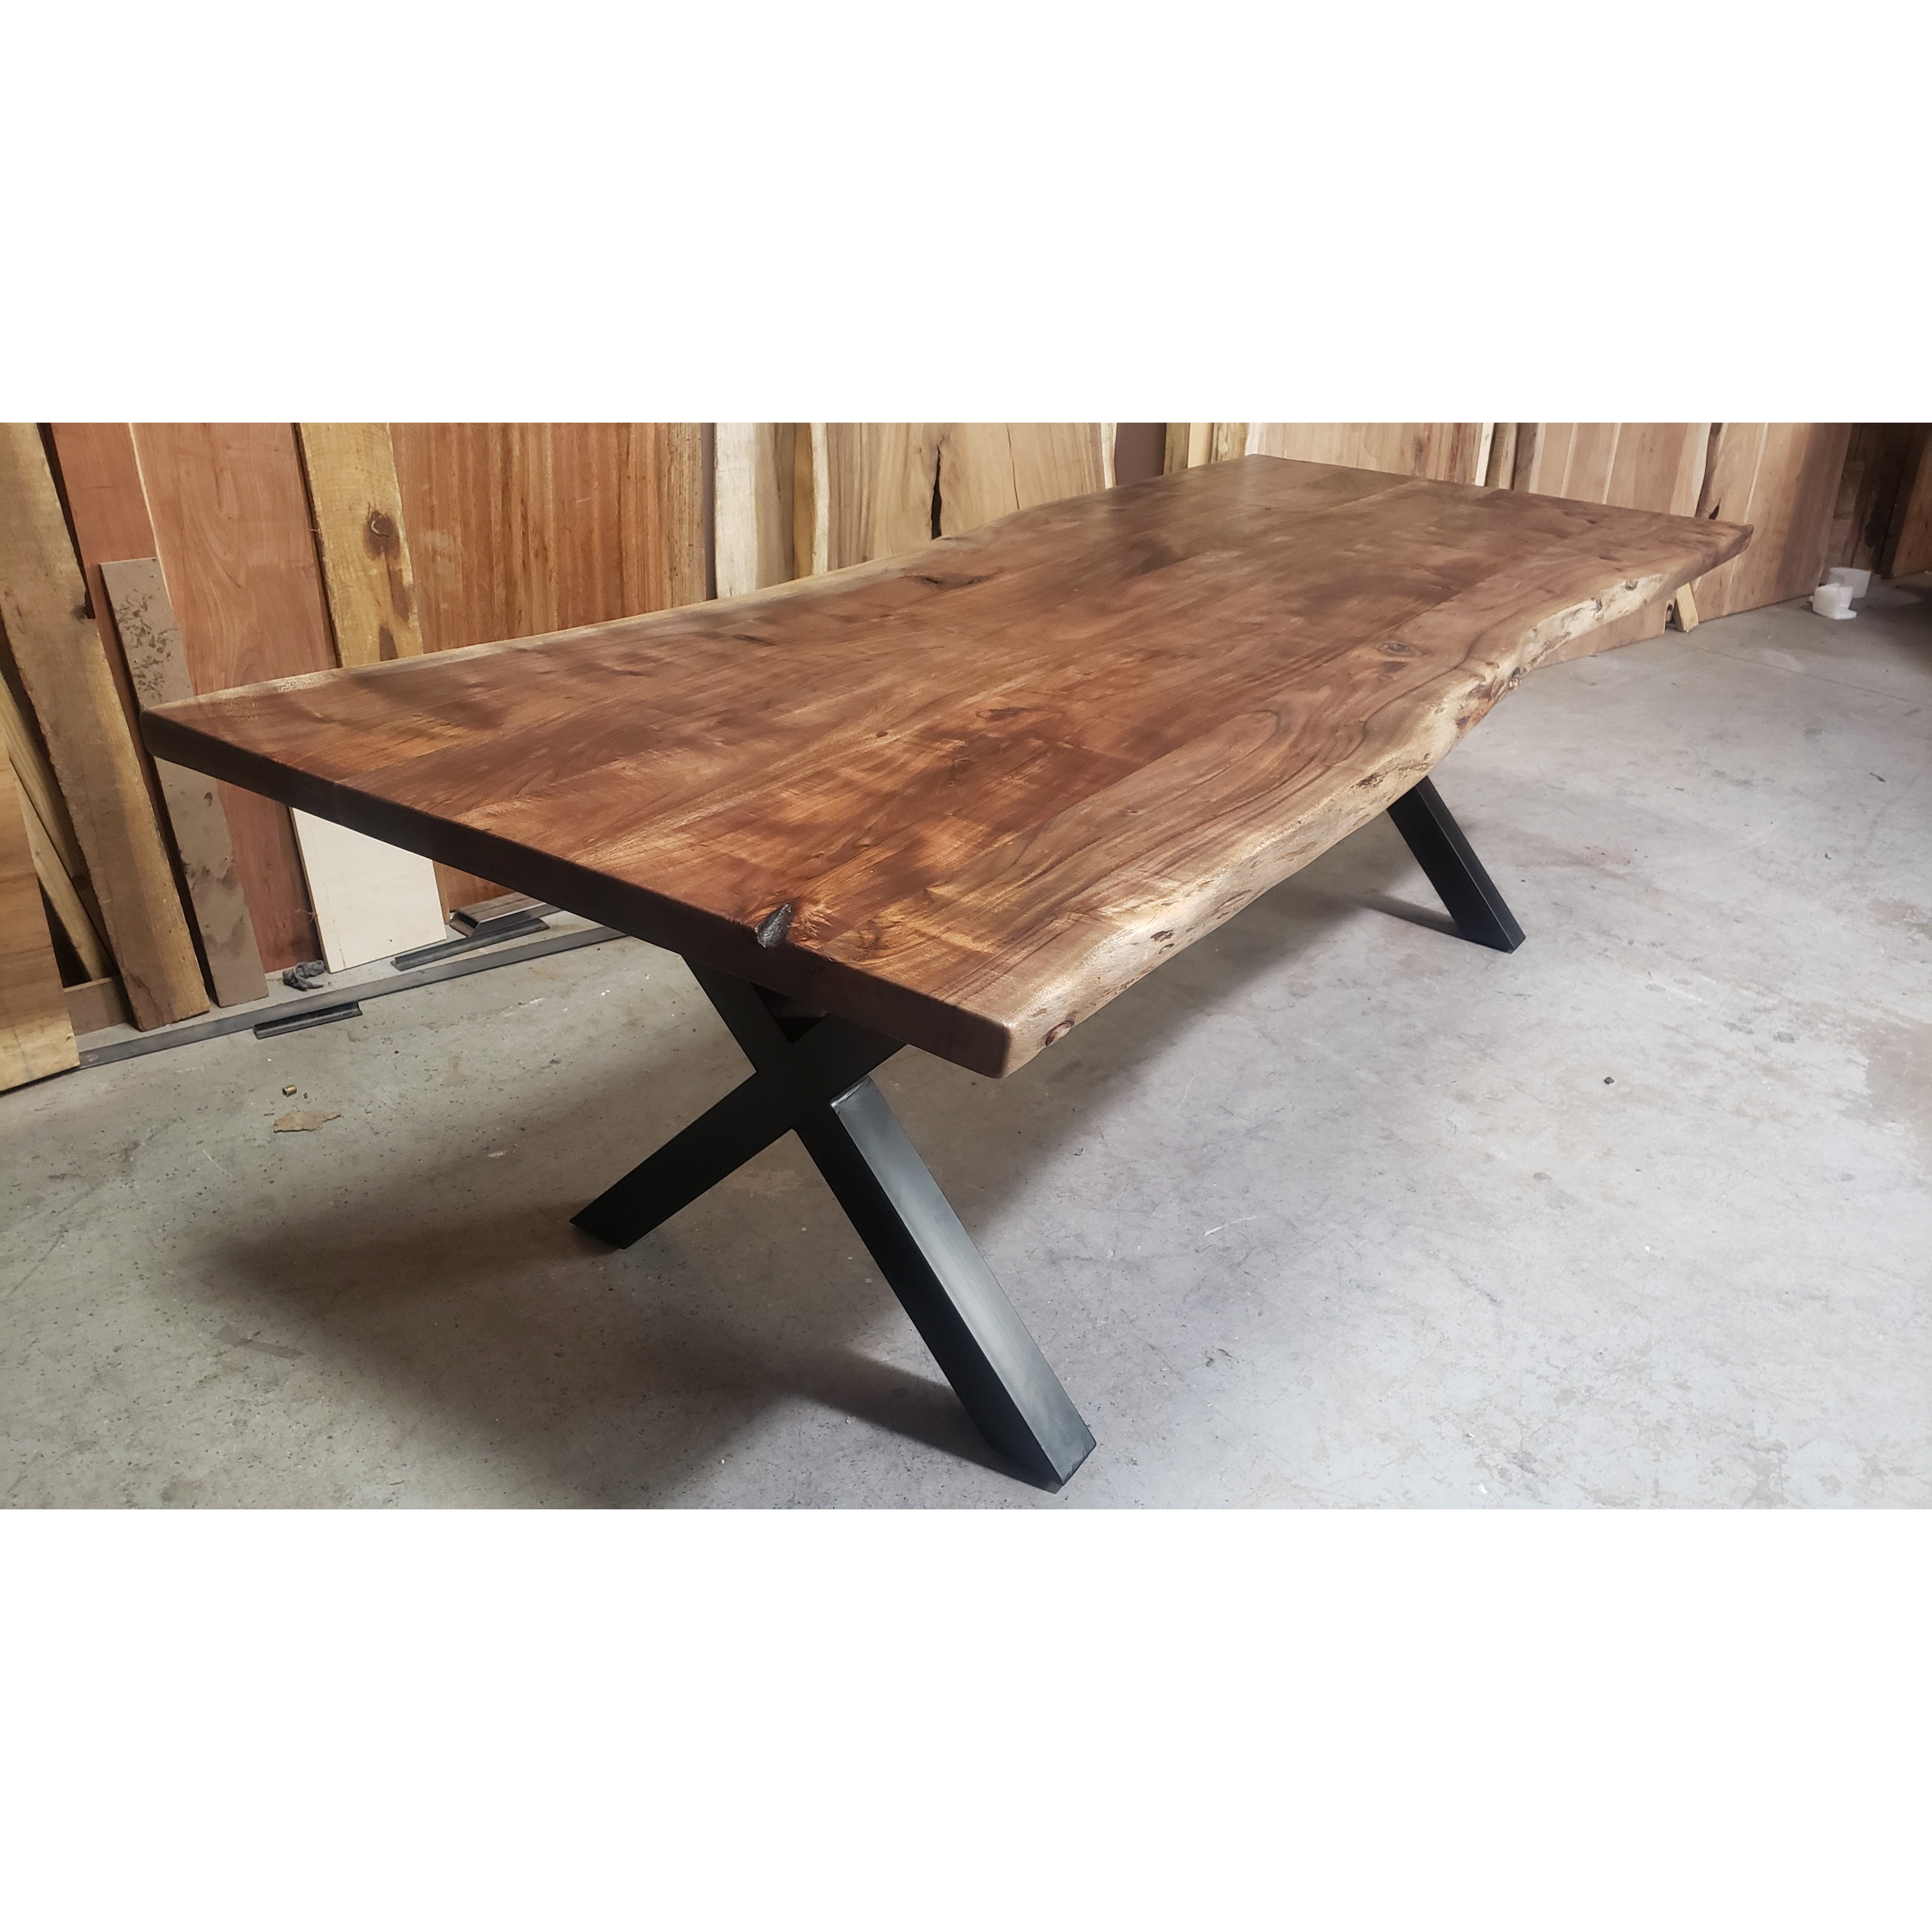 Finely Handcrafted, 96L Live Edge Acacia Wood Dining Table